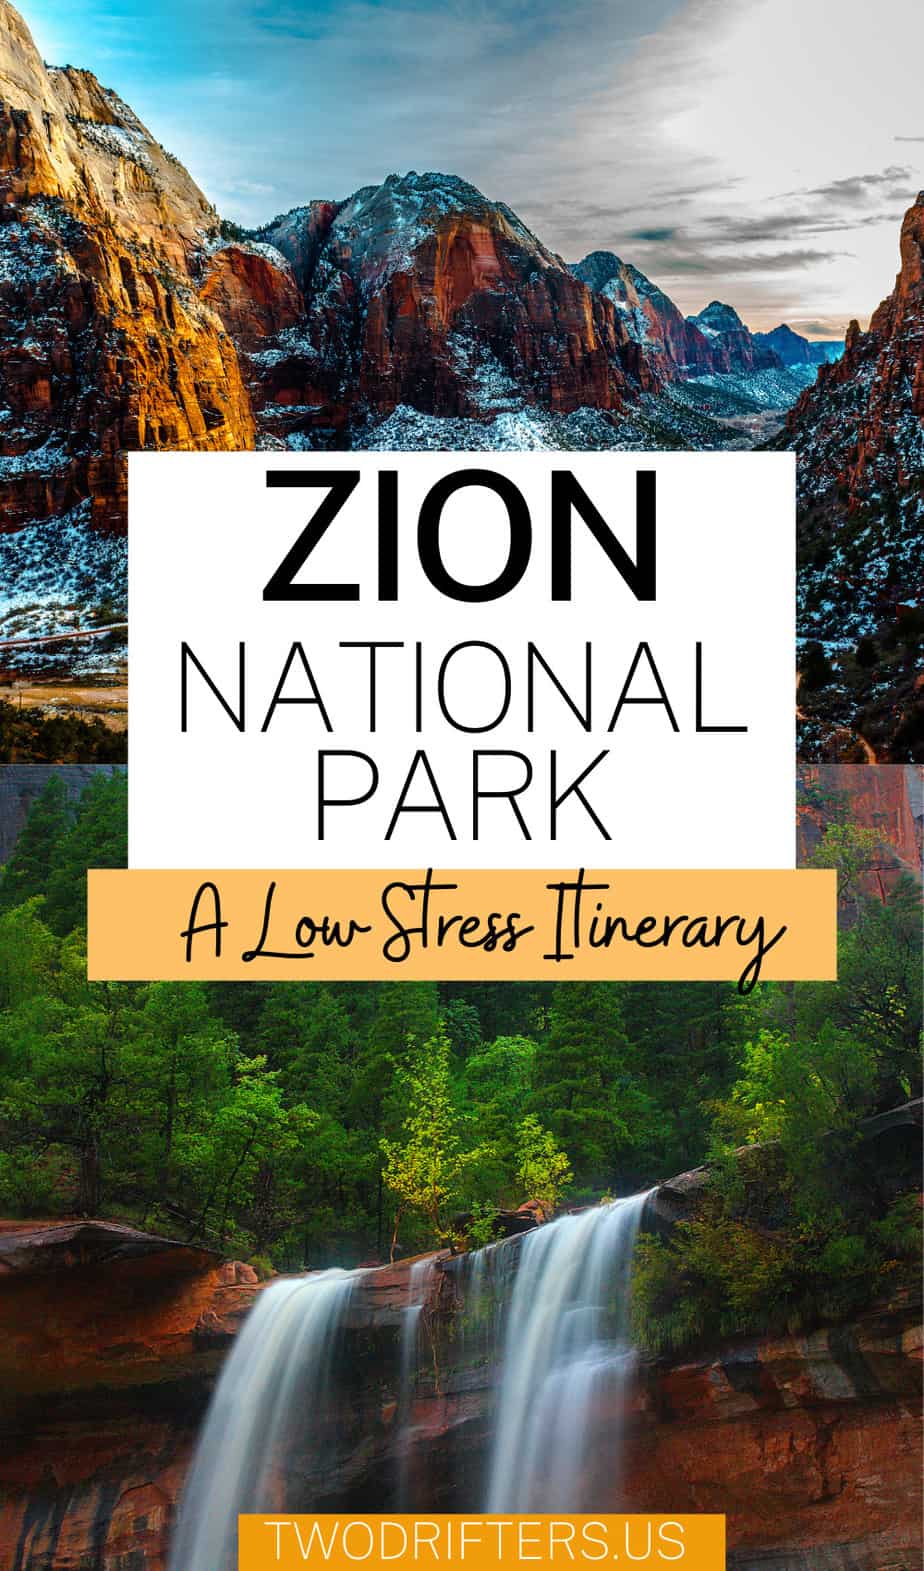 Pinterest social image that says "Zion National Park: A Low Stress Itinerary."